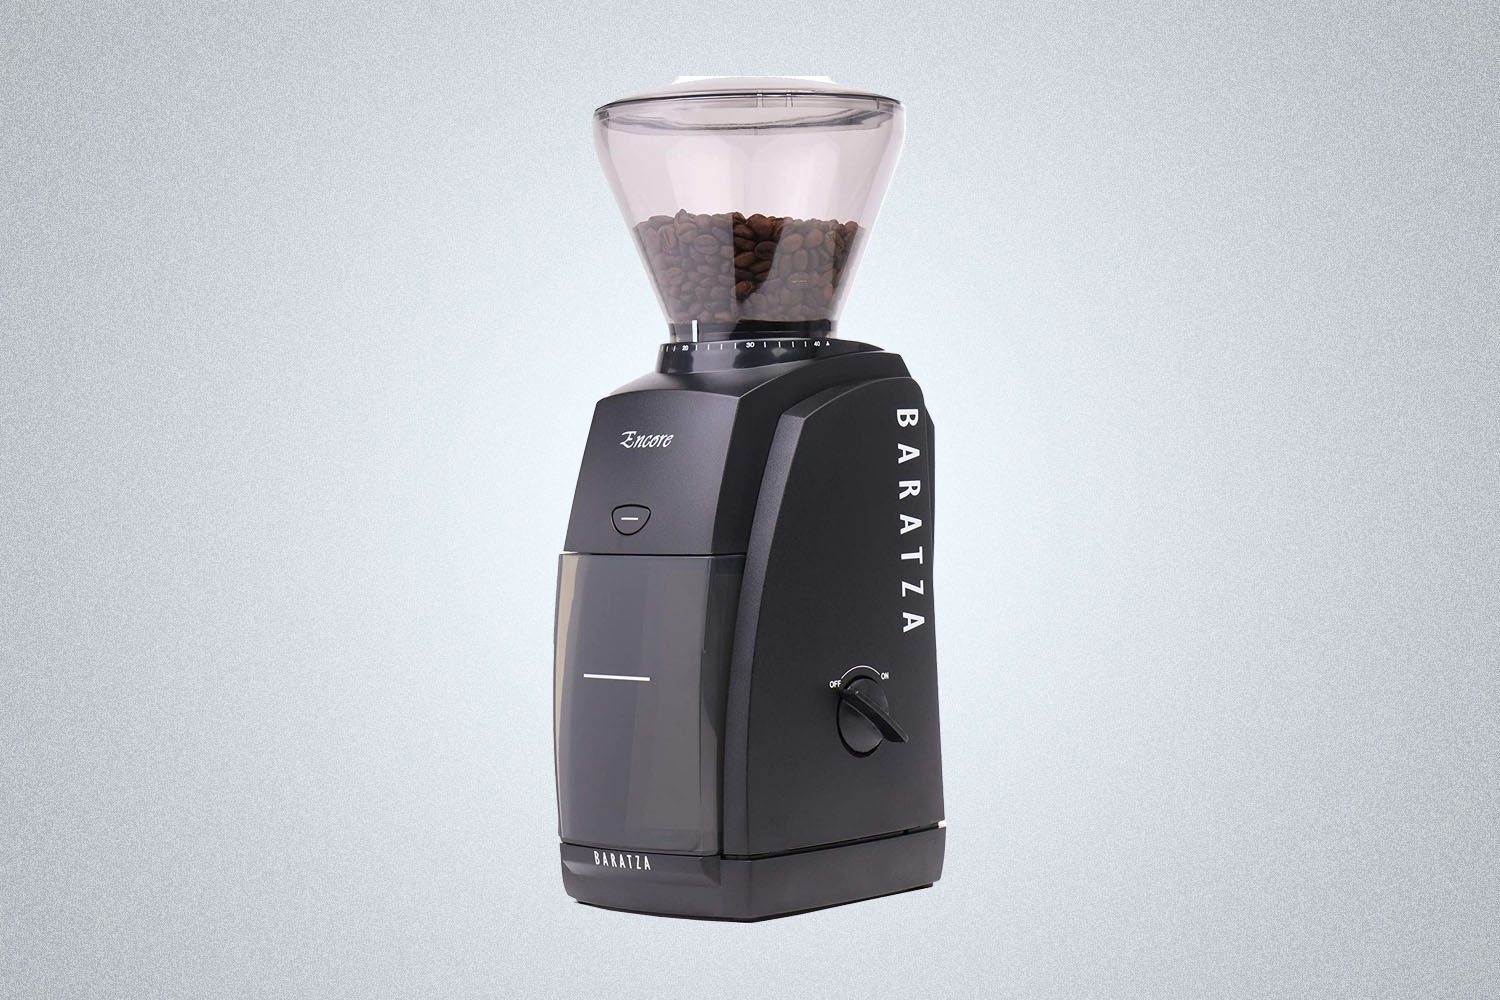 9 Best coffee accessories for brewing at home » Gadget Flow